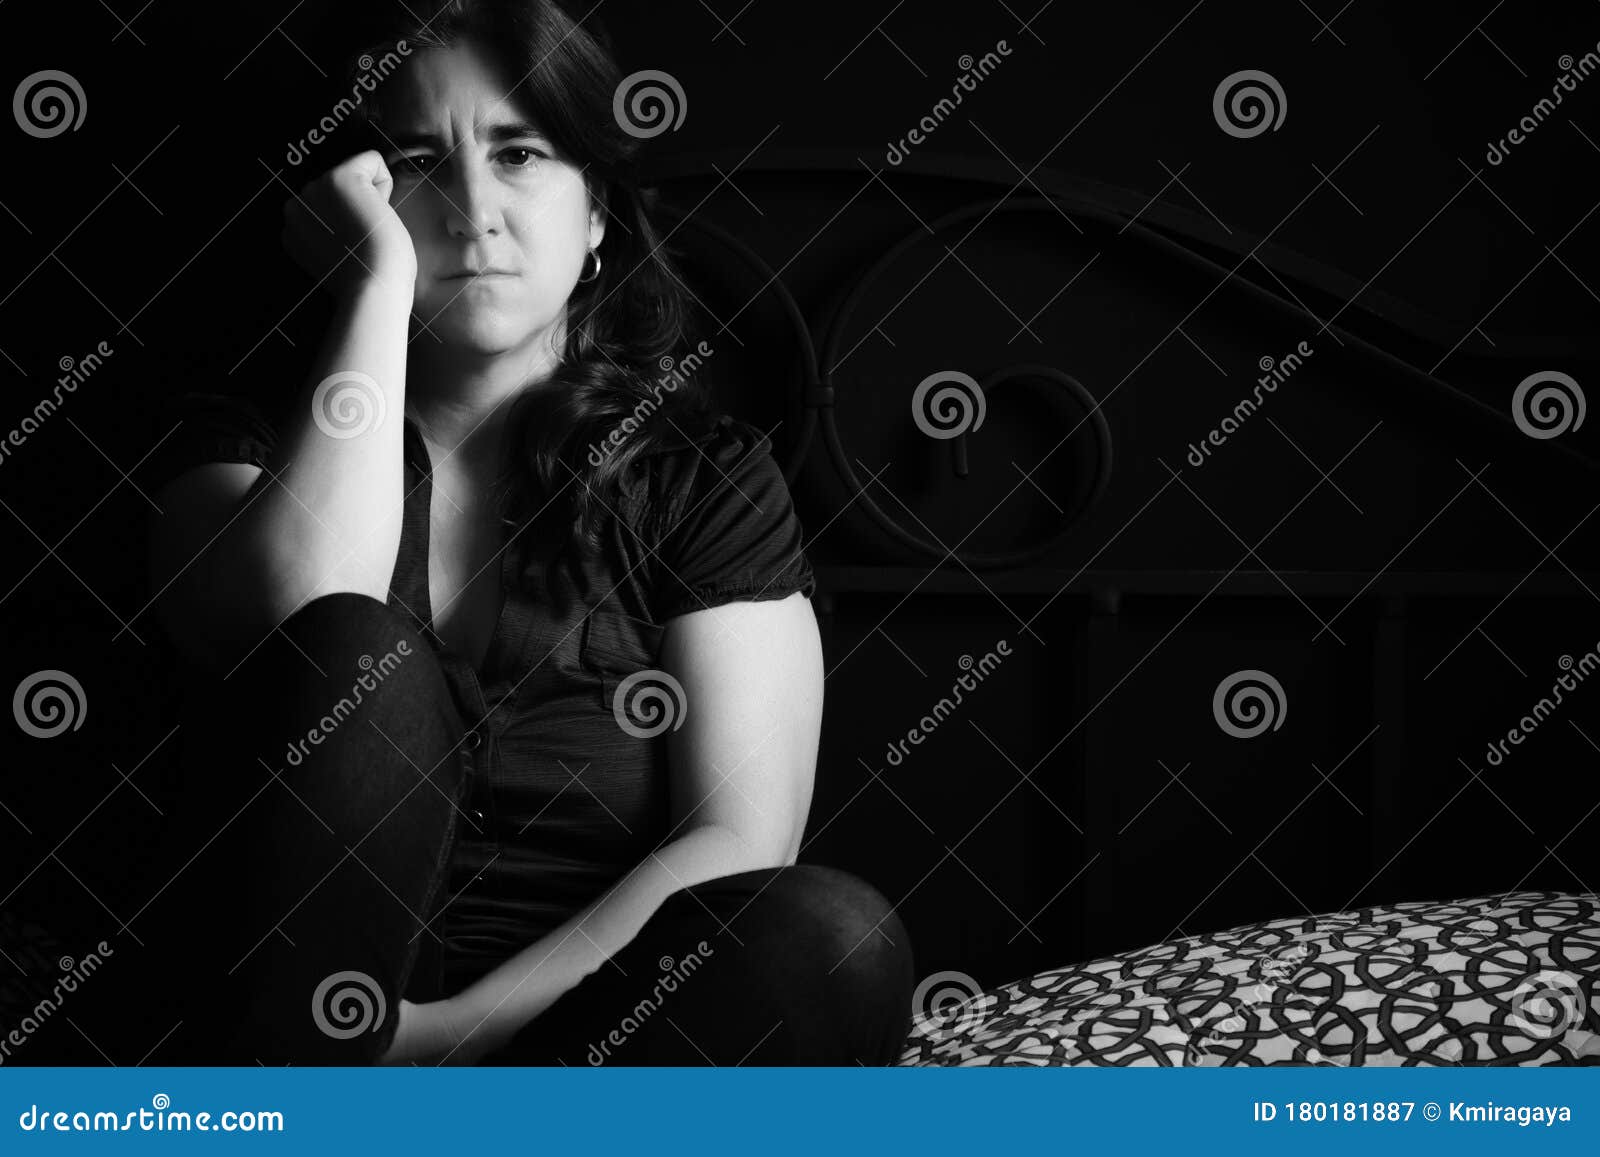 Sad and Lonely Woman Sitting on Her Bed - Black and White Portrait ...